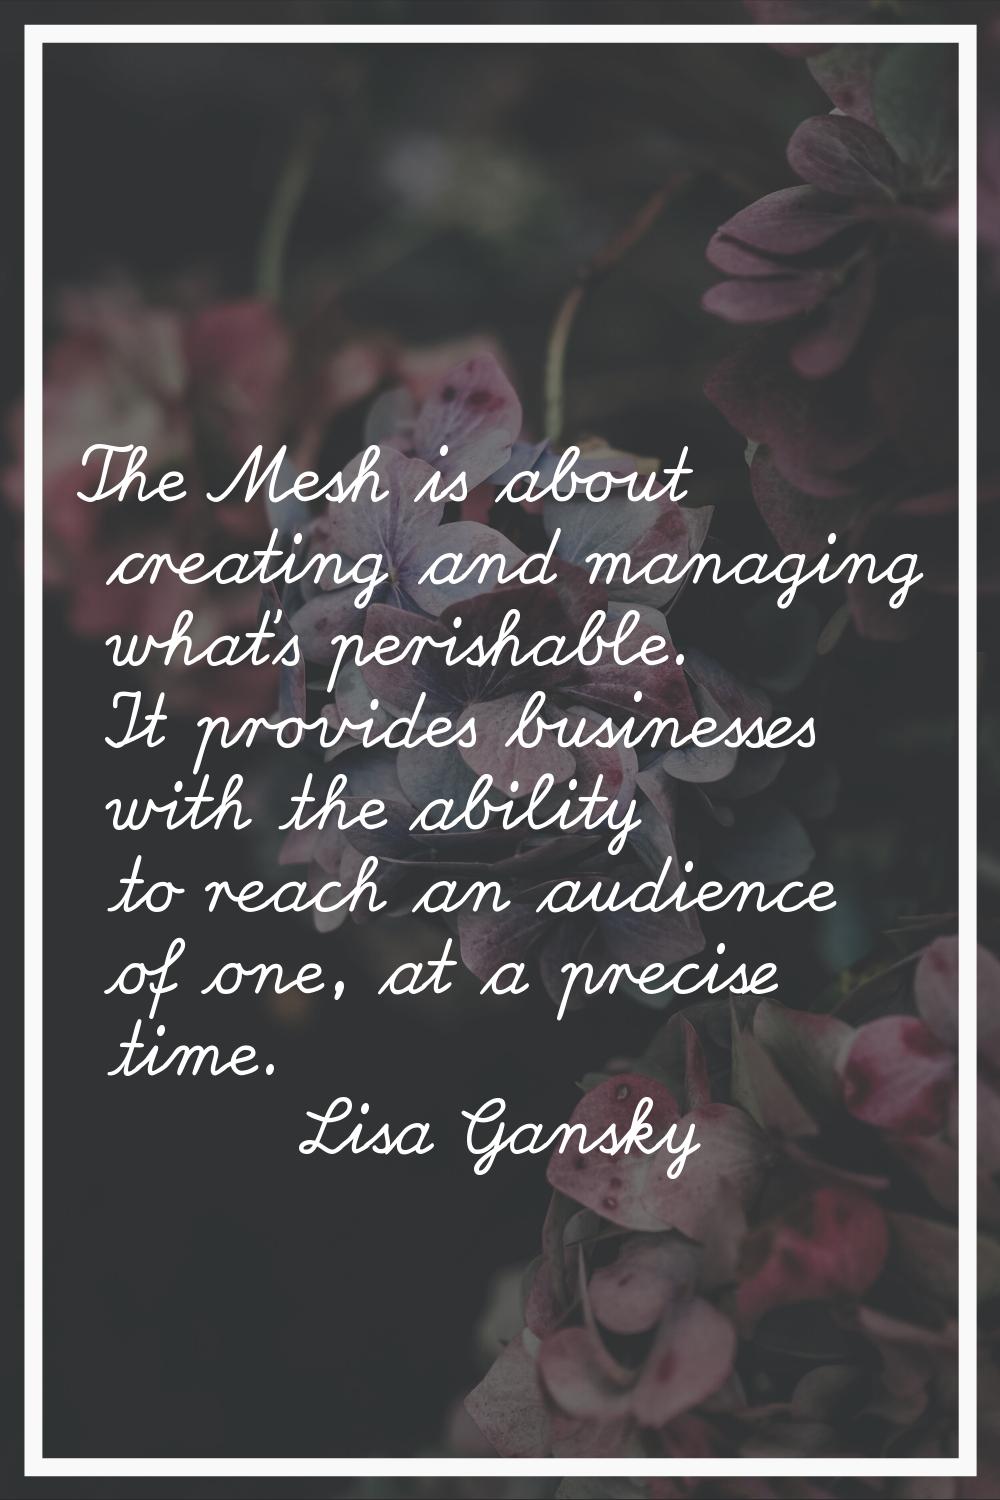 The Mesh is about creating and managing what's perishable. It provides businesses with the ability 